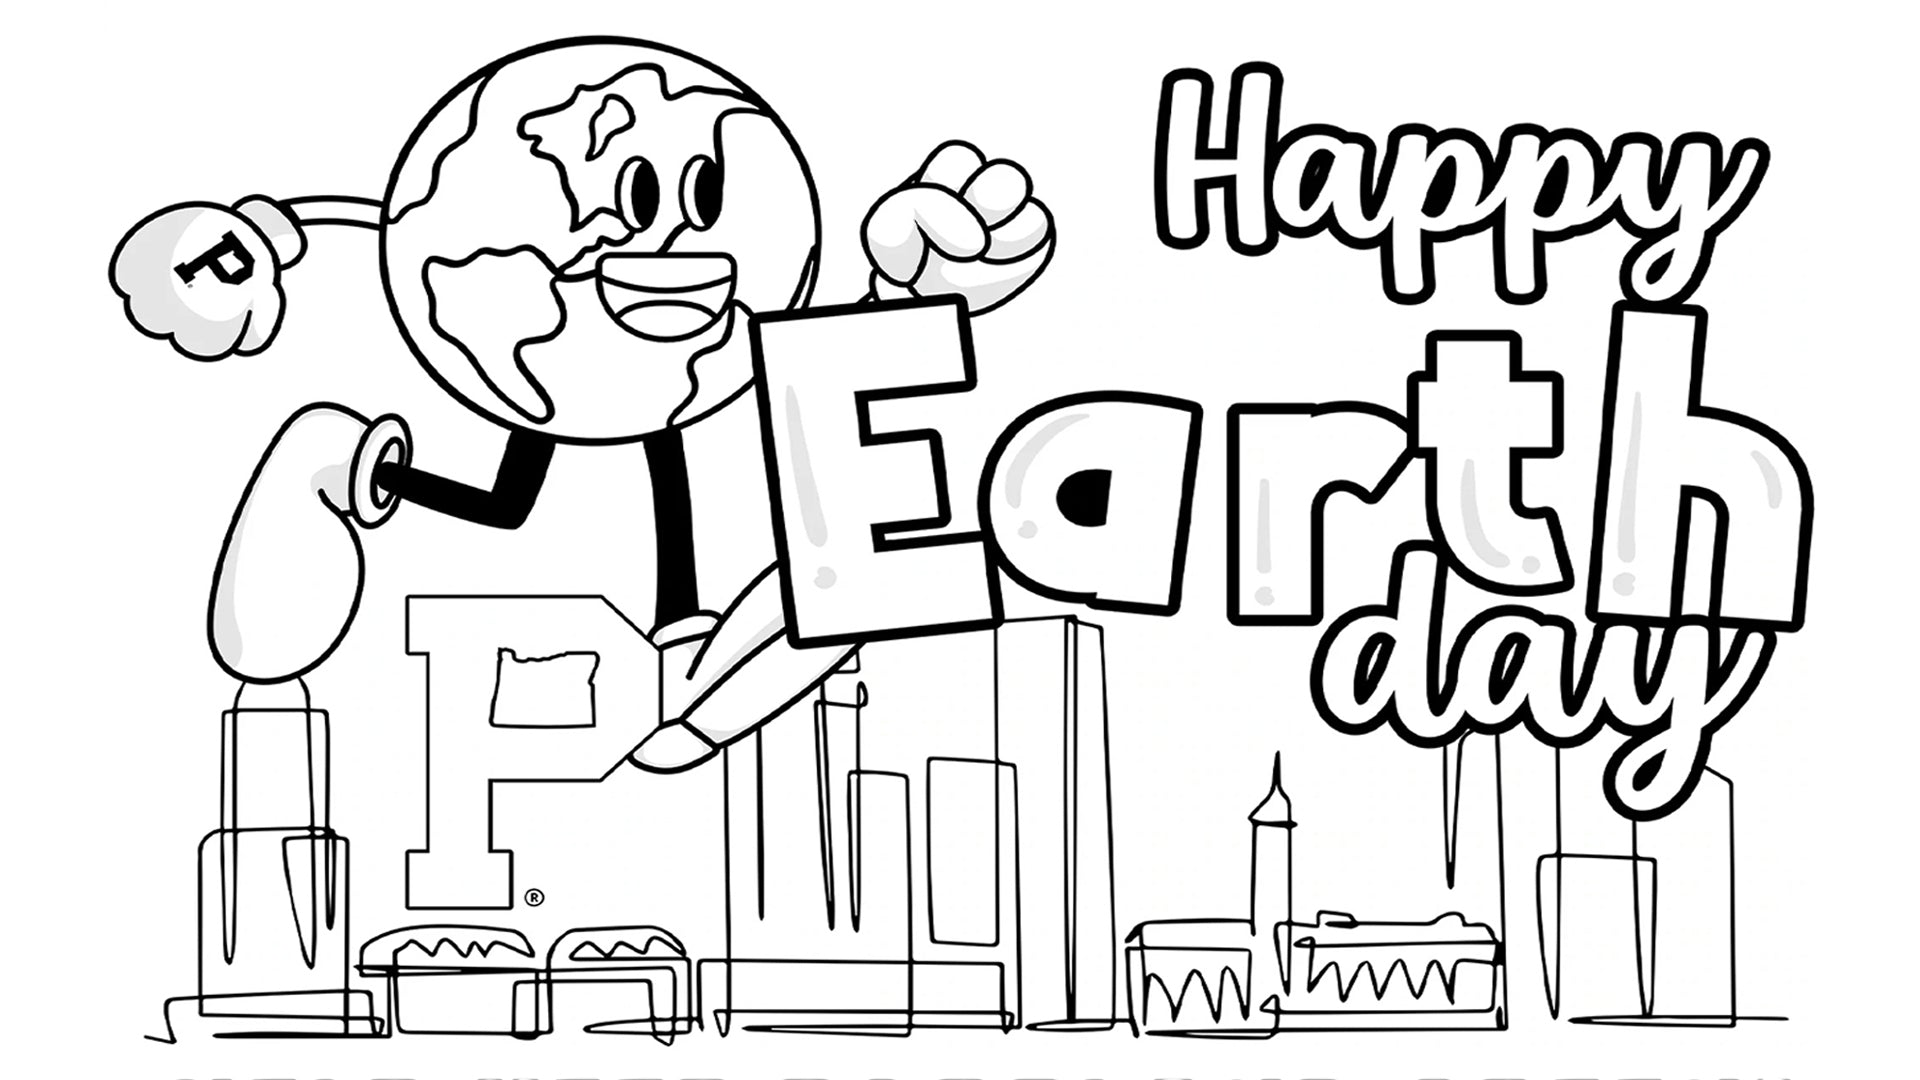 Happy Earth Day - Free Coloring Page